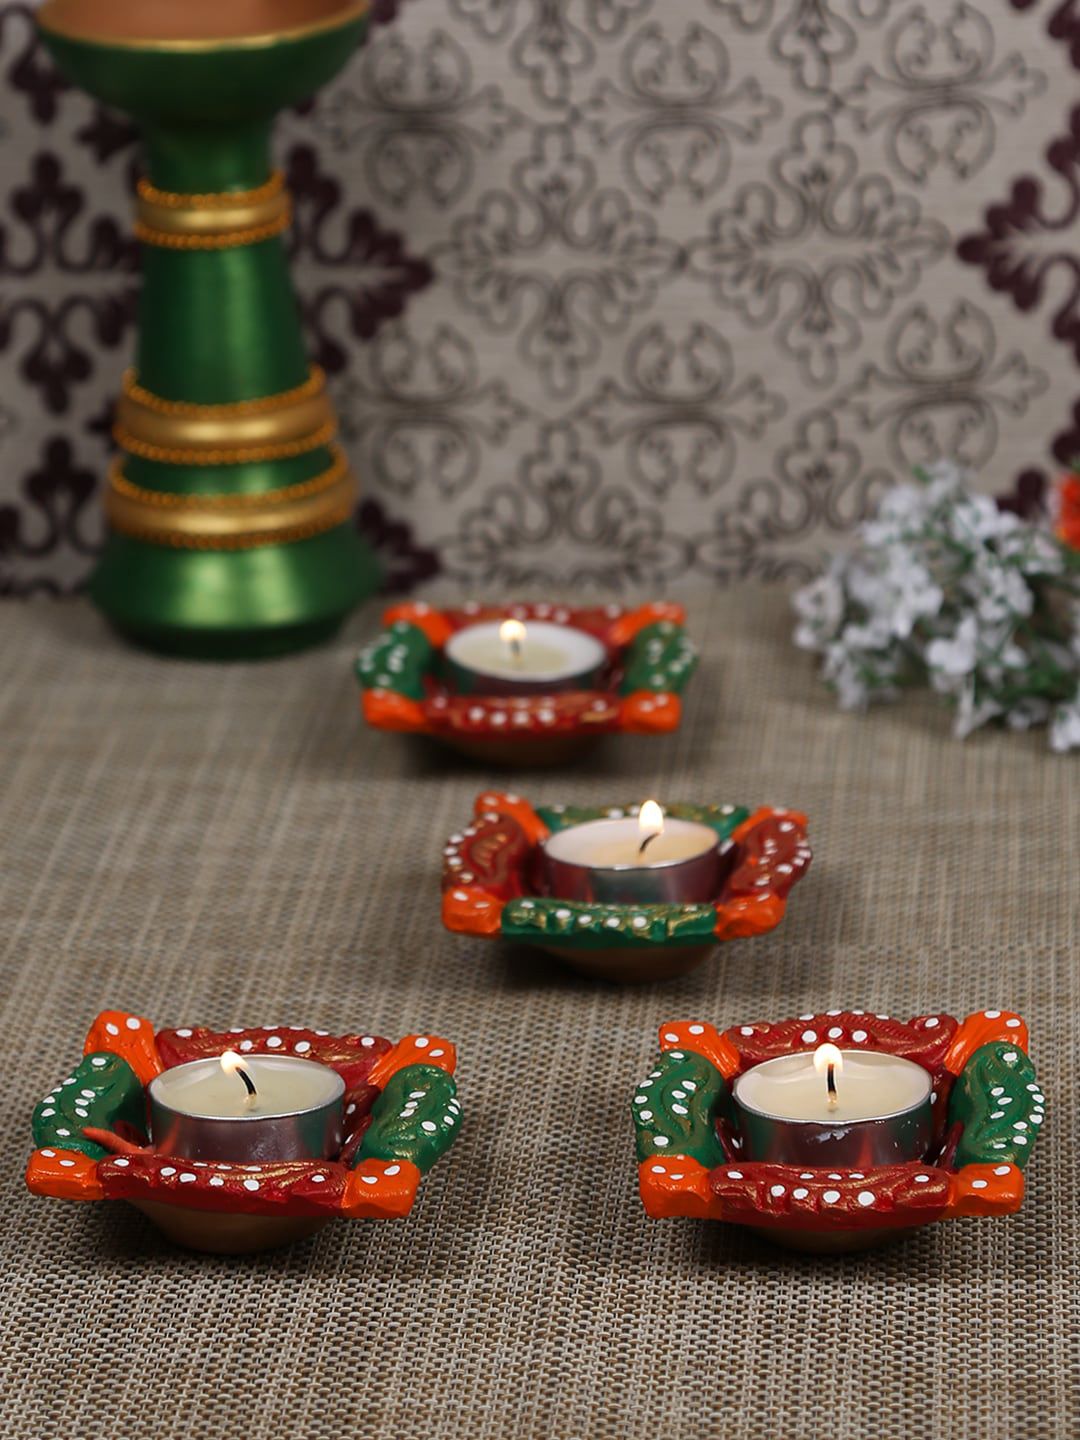 Aapno Rajasthan Set Of 4 Handcrafted Square-Shaped Terracotta Diya Price in India